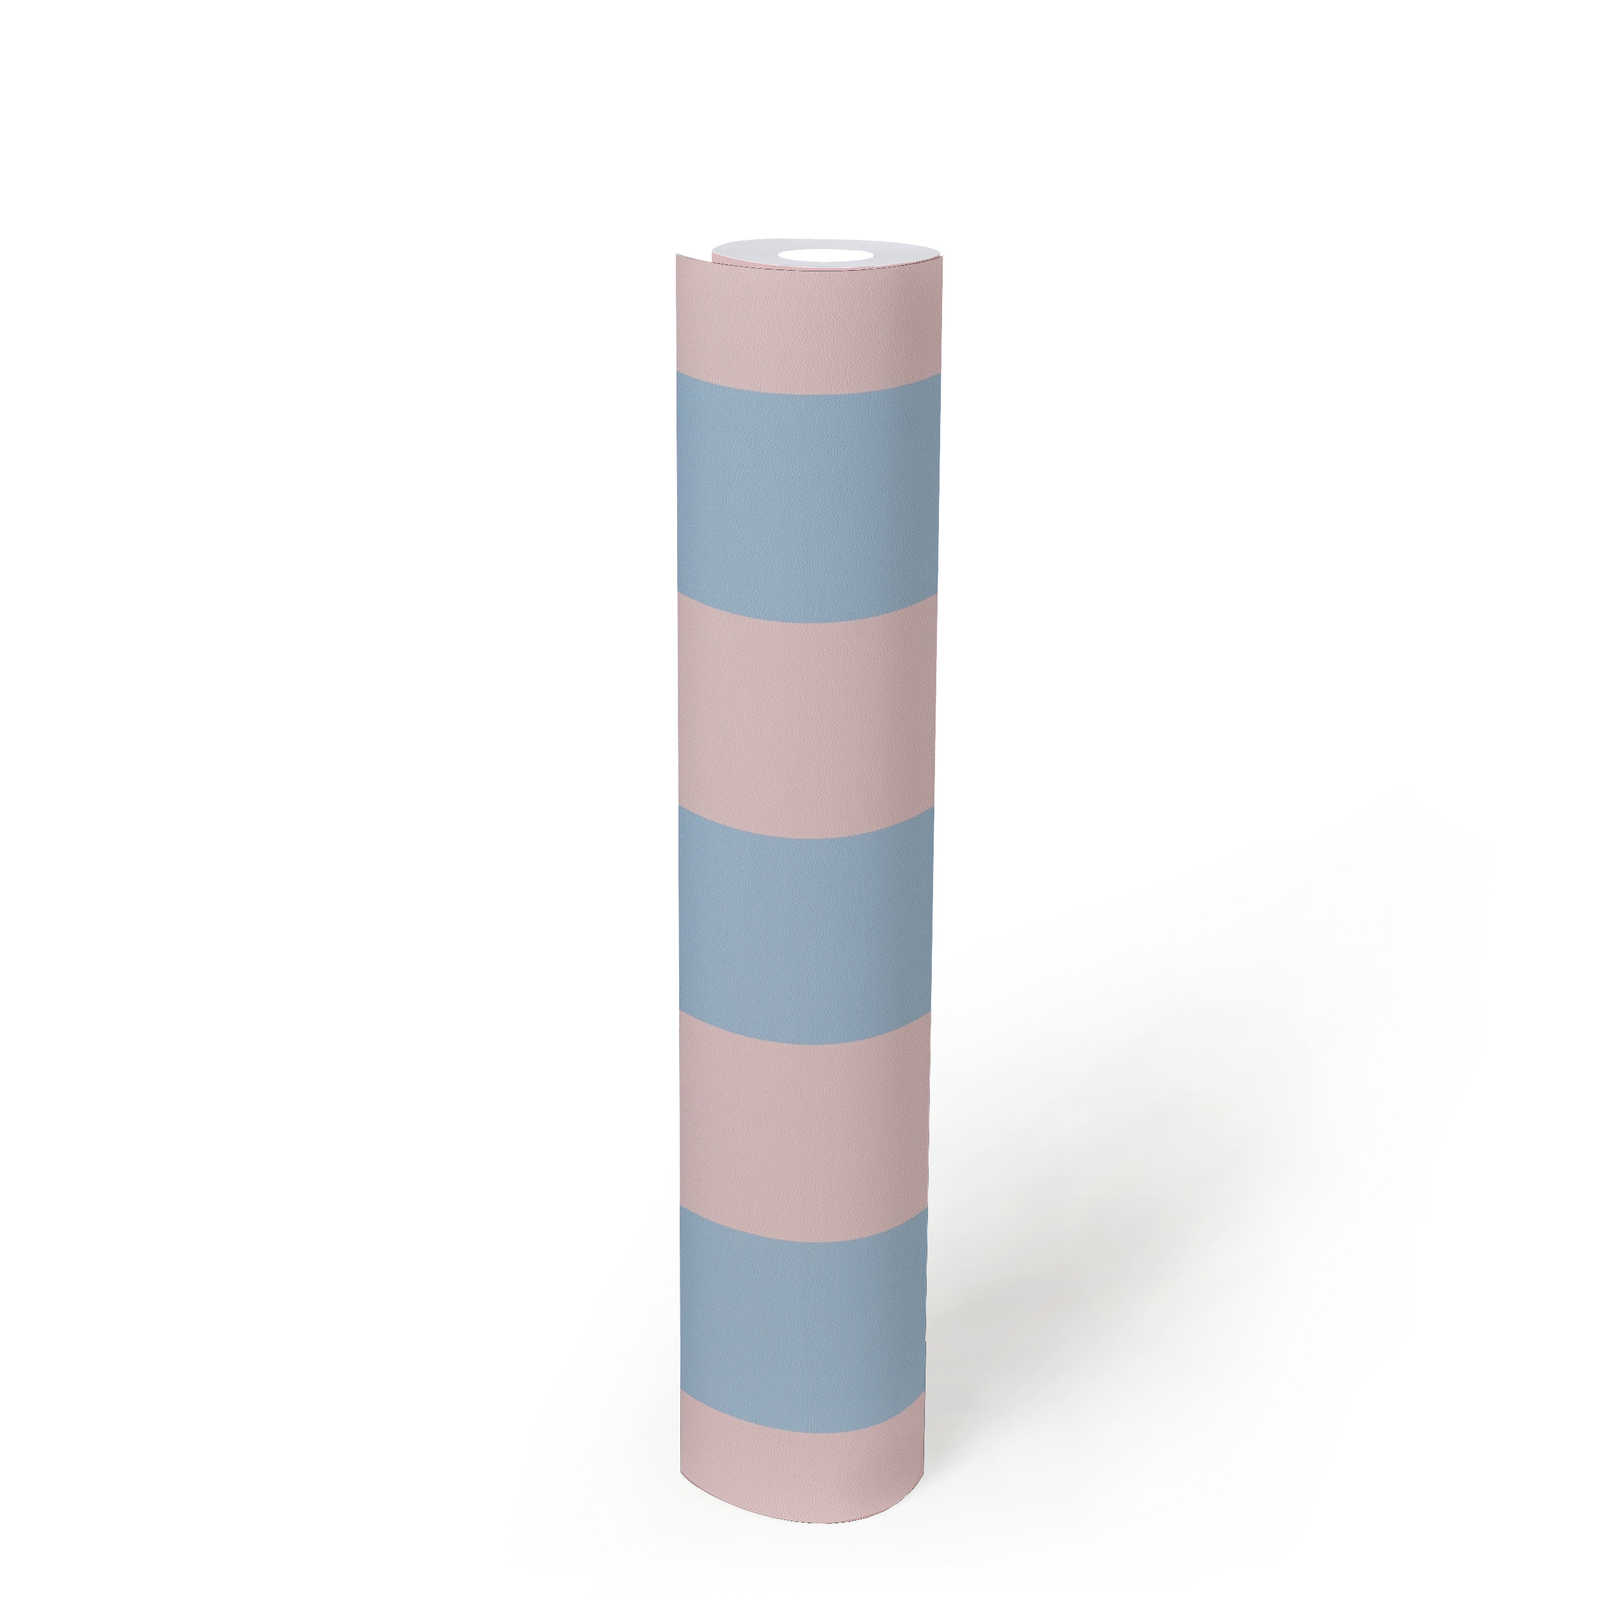             Non-woven wallpaper graphic squares two-tone - blue, pink
        